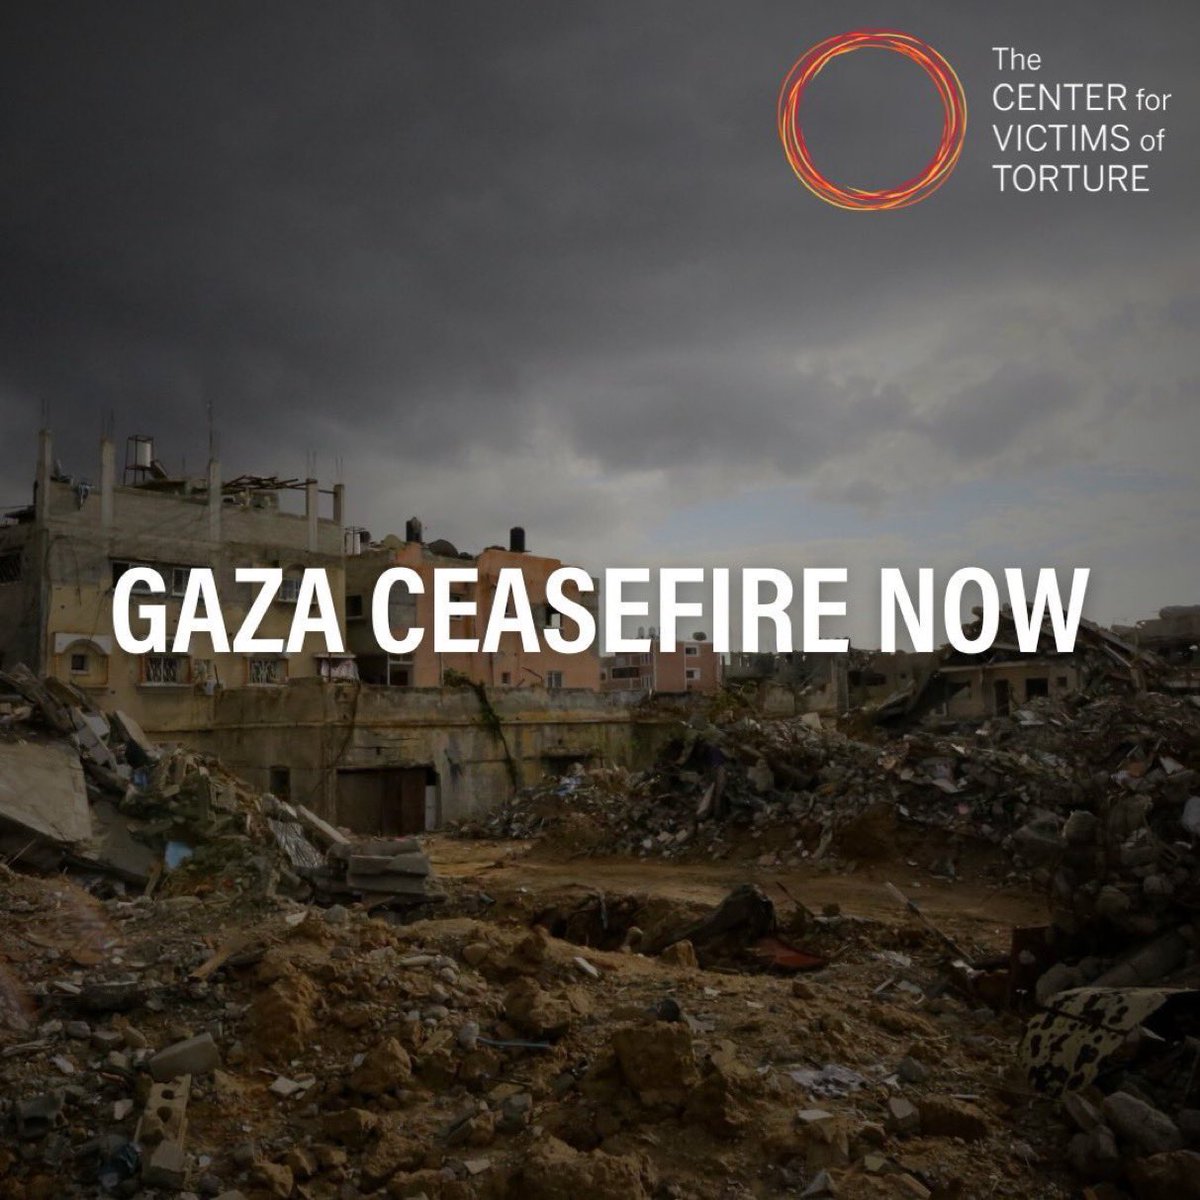 The #Rafah offensive and this unconscionable killing must end. Given mounting evidence of potential genocide, all states should impose an arms embargo on Israel & ensure full implementation of UN Security Council Res.2728 and ICJ’s provisional measures order. #GazaCeasefireNow